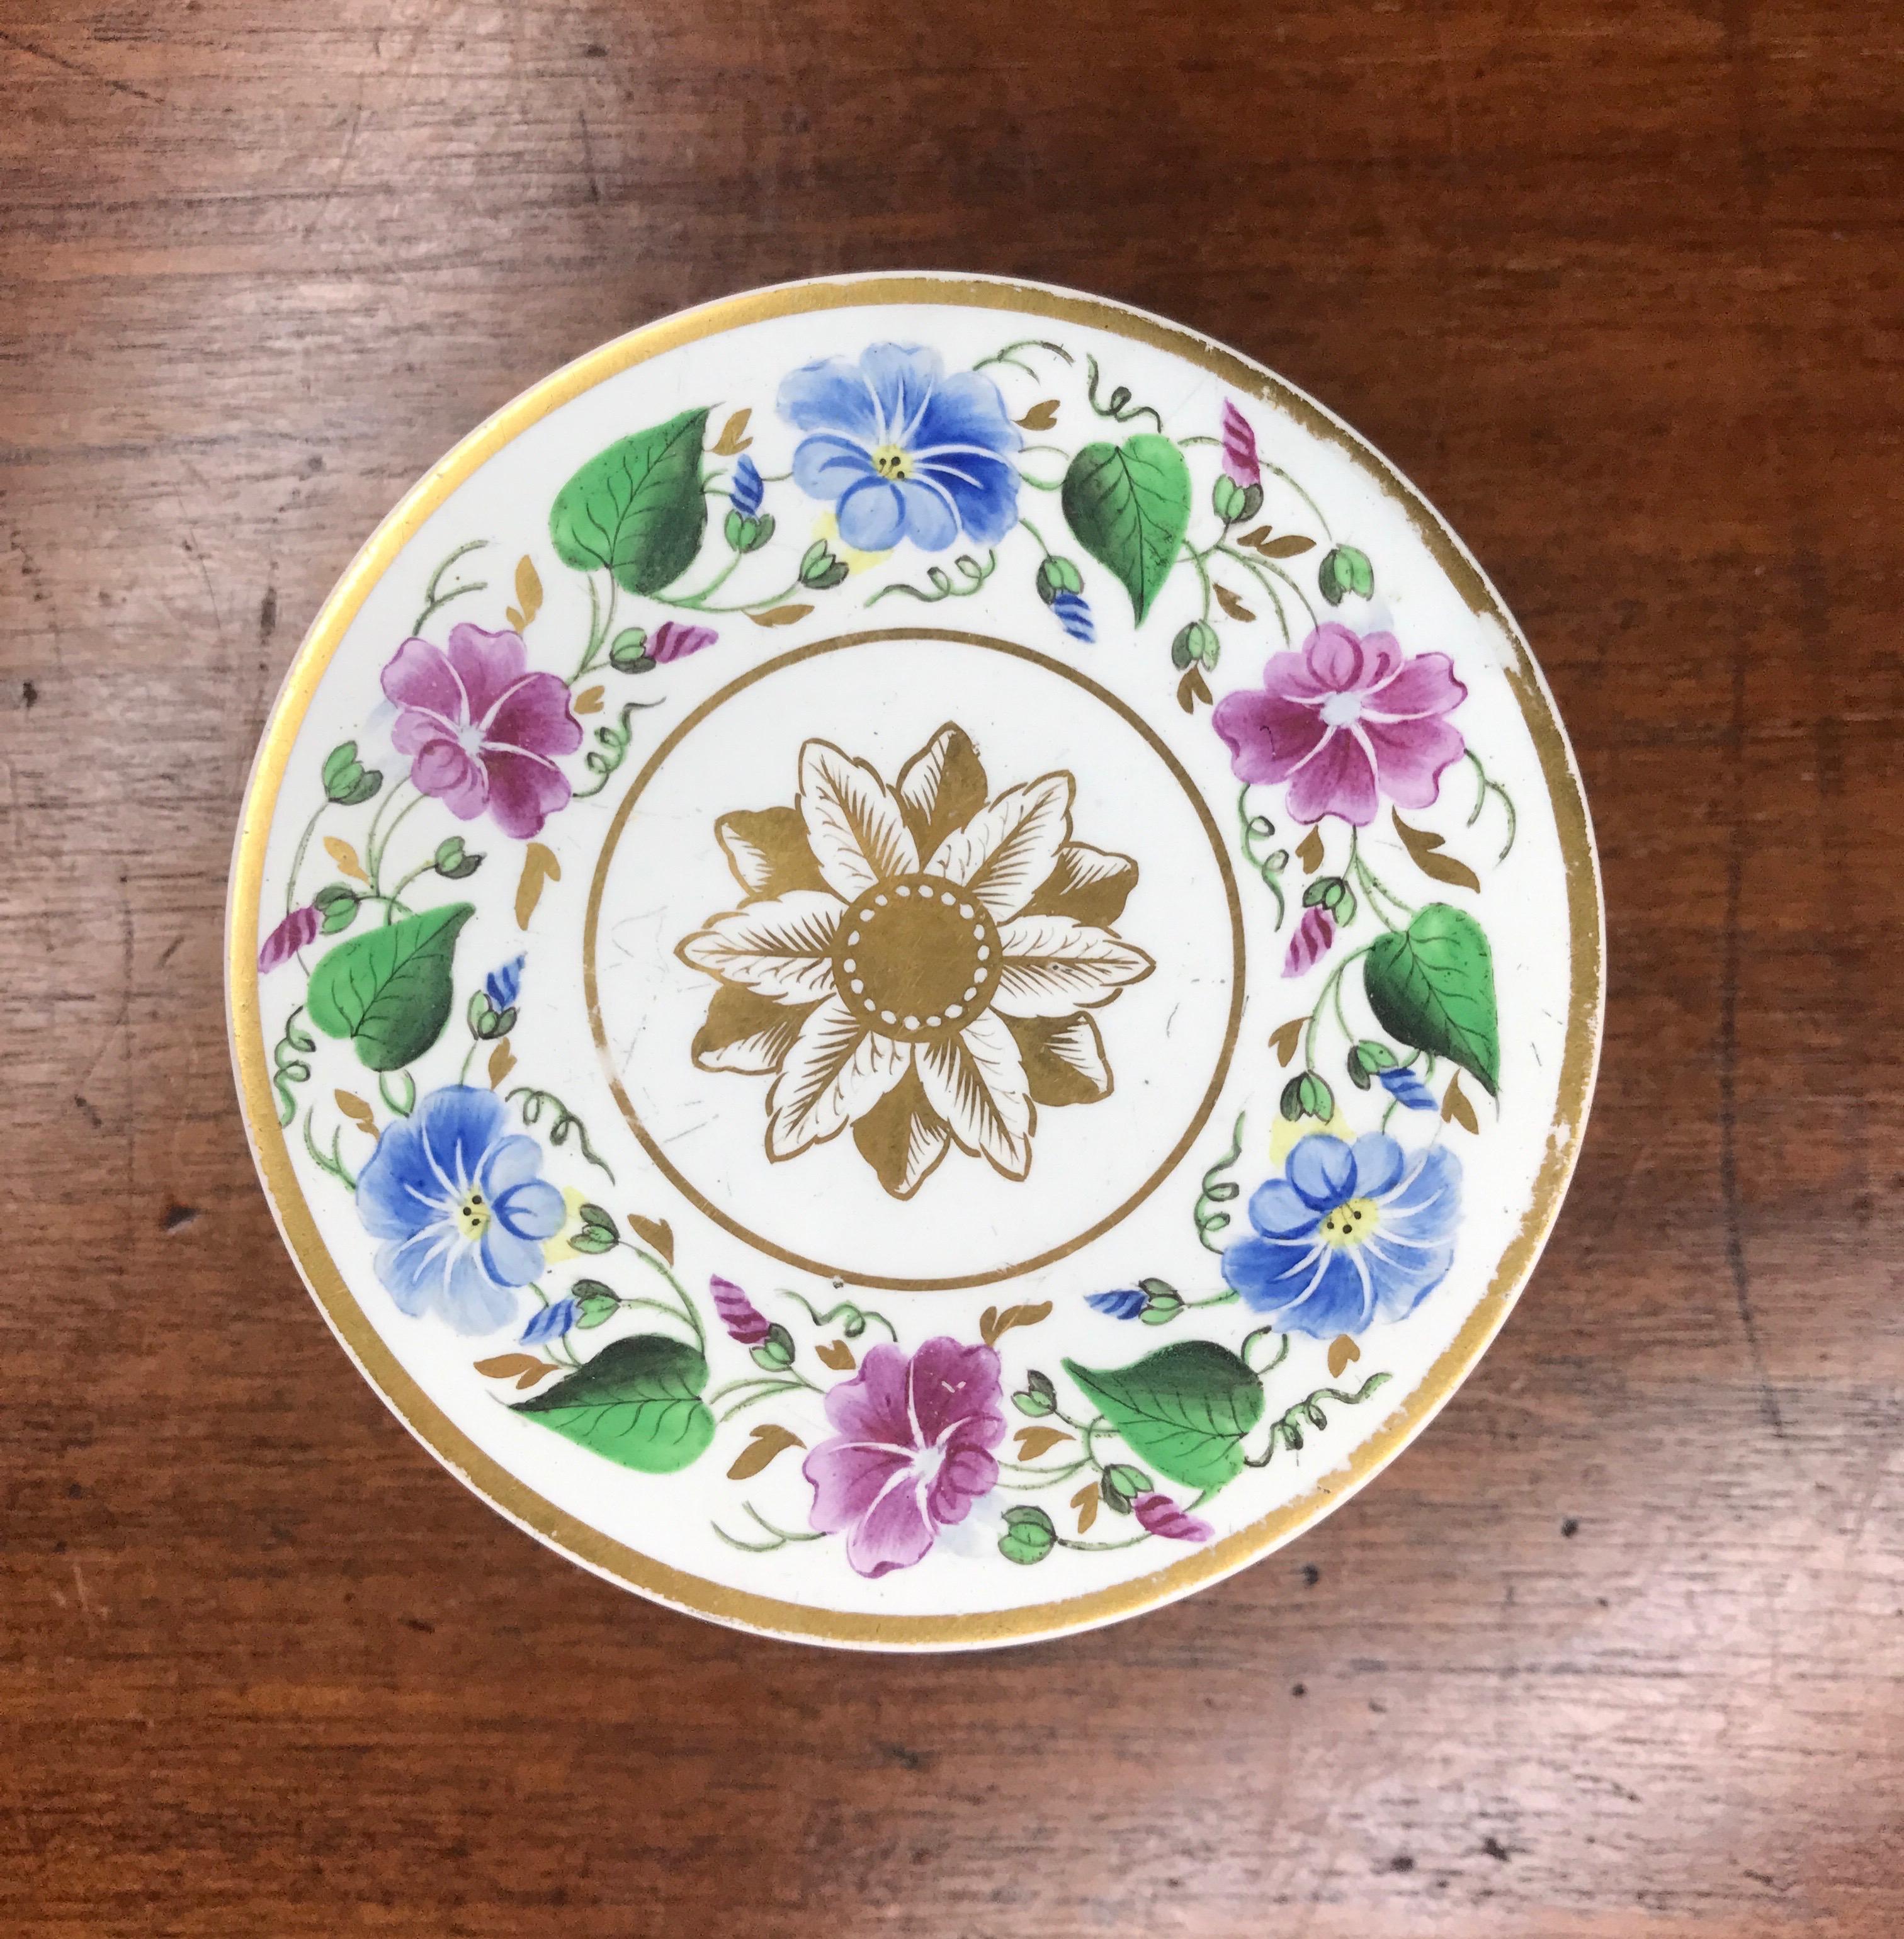 Elegant pearlware box, the circular form well painted with a band of blue & pink convolvulus, around a central classical leaf roundel, the sides with similar decoration between two bands simulating a woven satin ribbon.

Unmarked, possibly